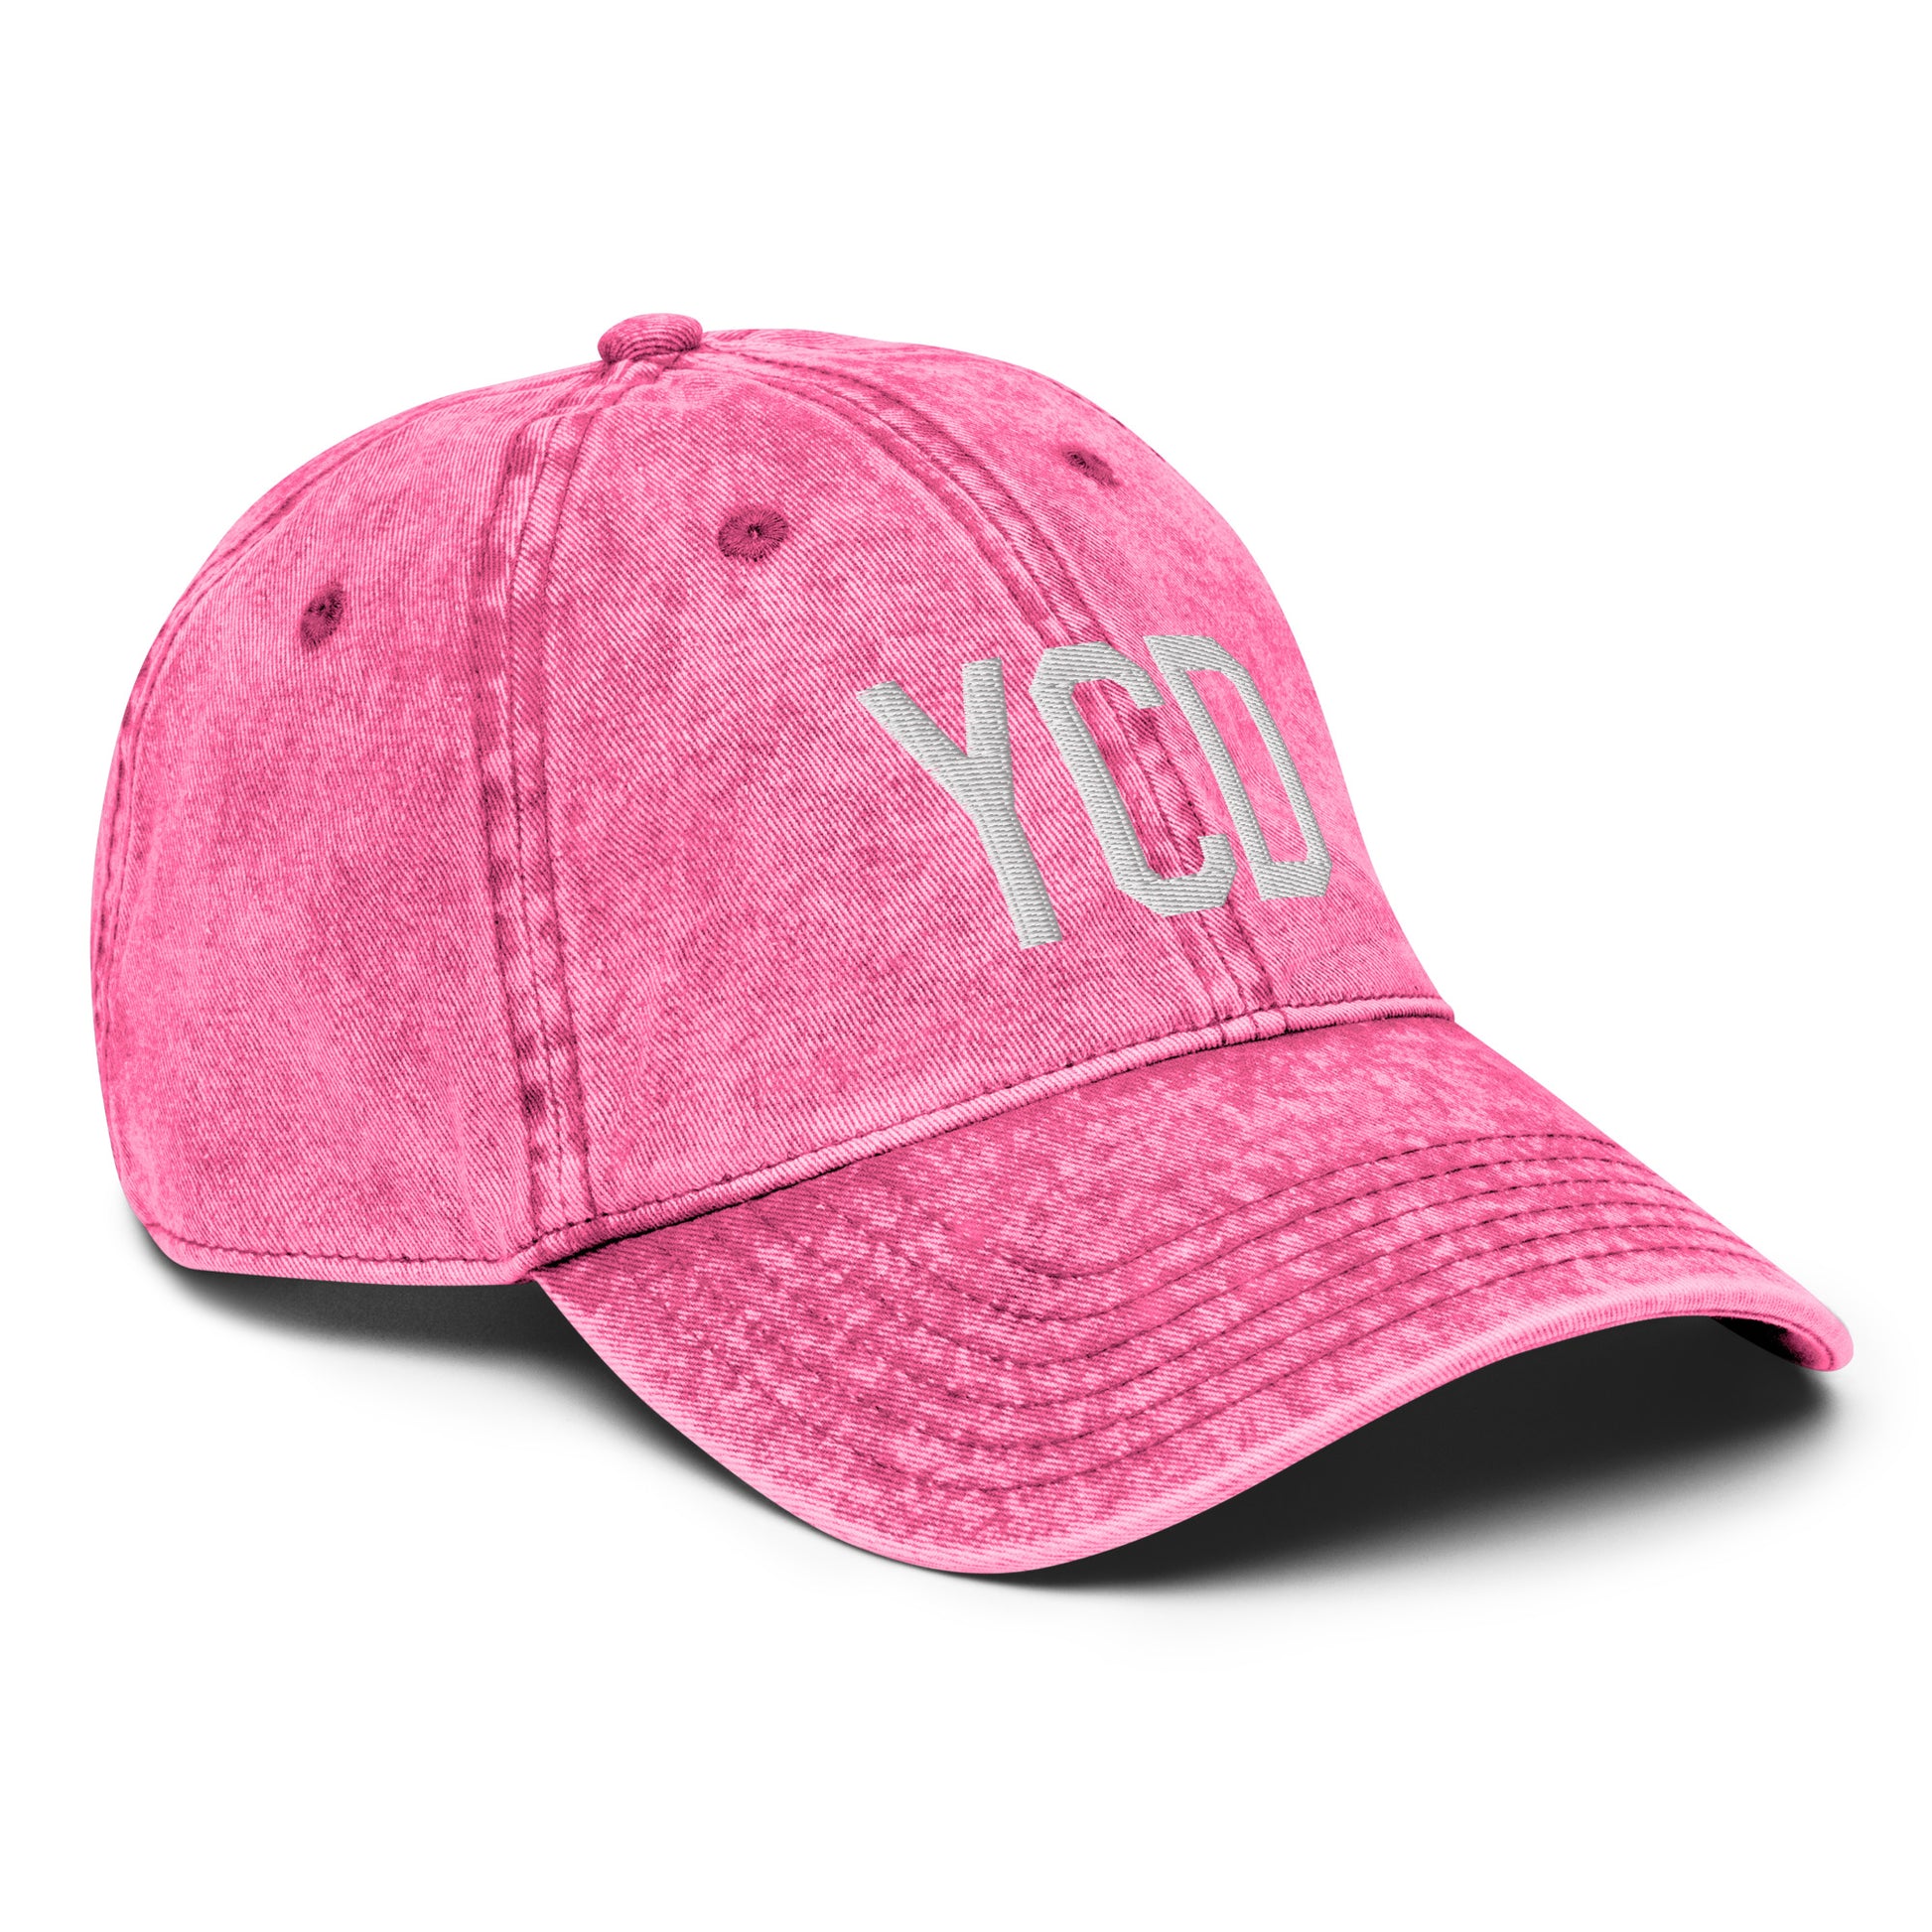 Airport Code Twill Cap - White • YCD Nanaimo • YHM Designs - Image 27